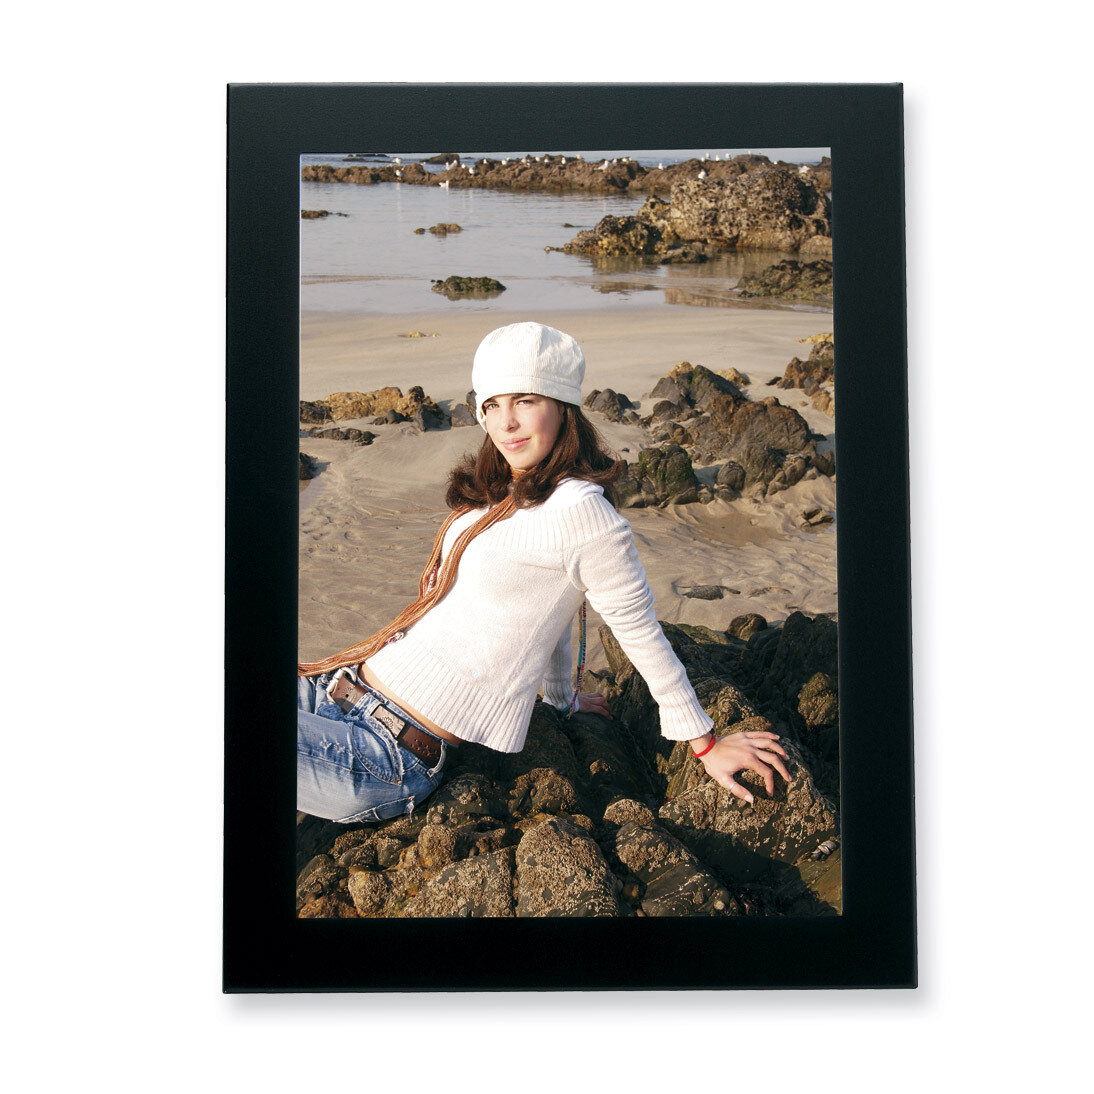 Aluminum 5 x 7 Inch Picture Frame GM1746